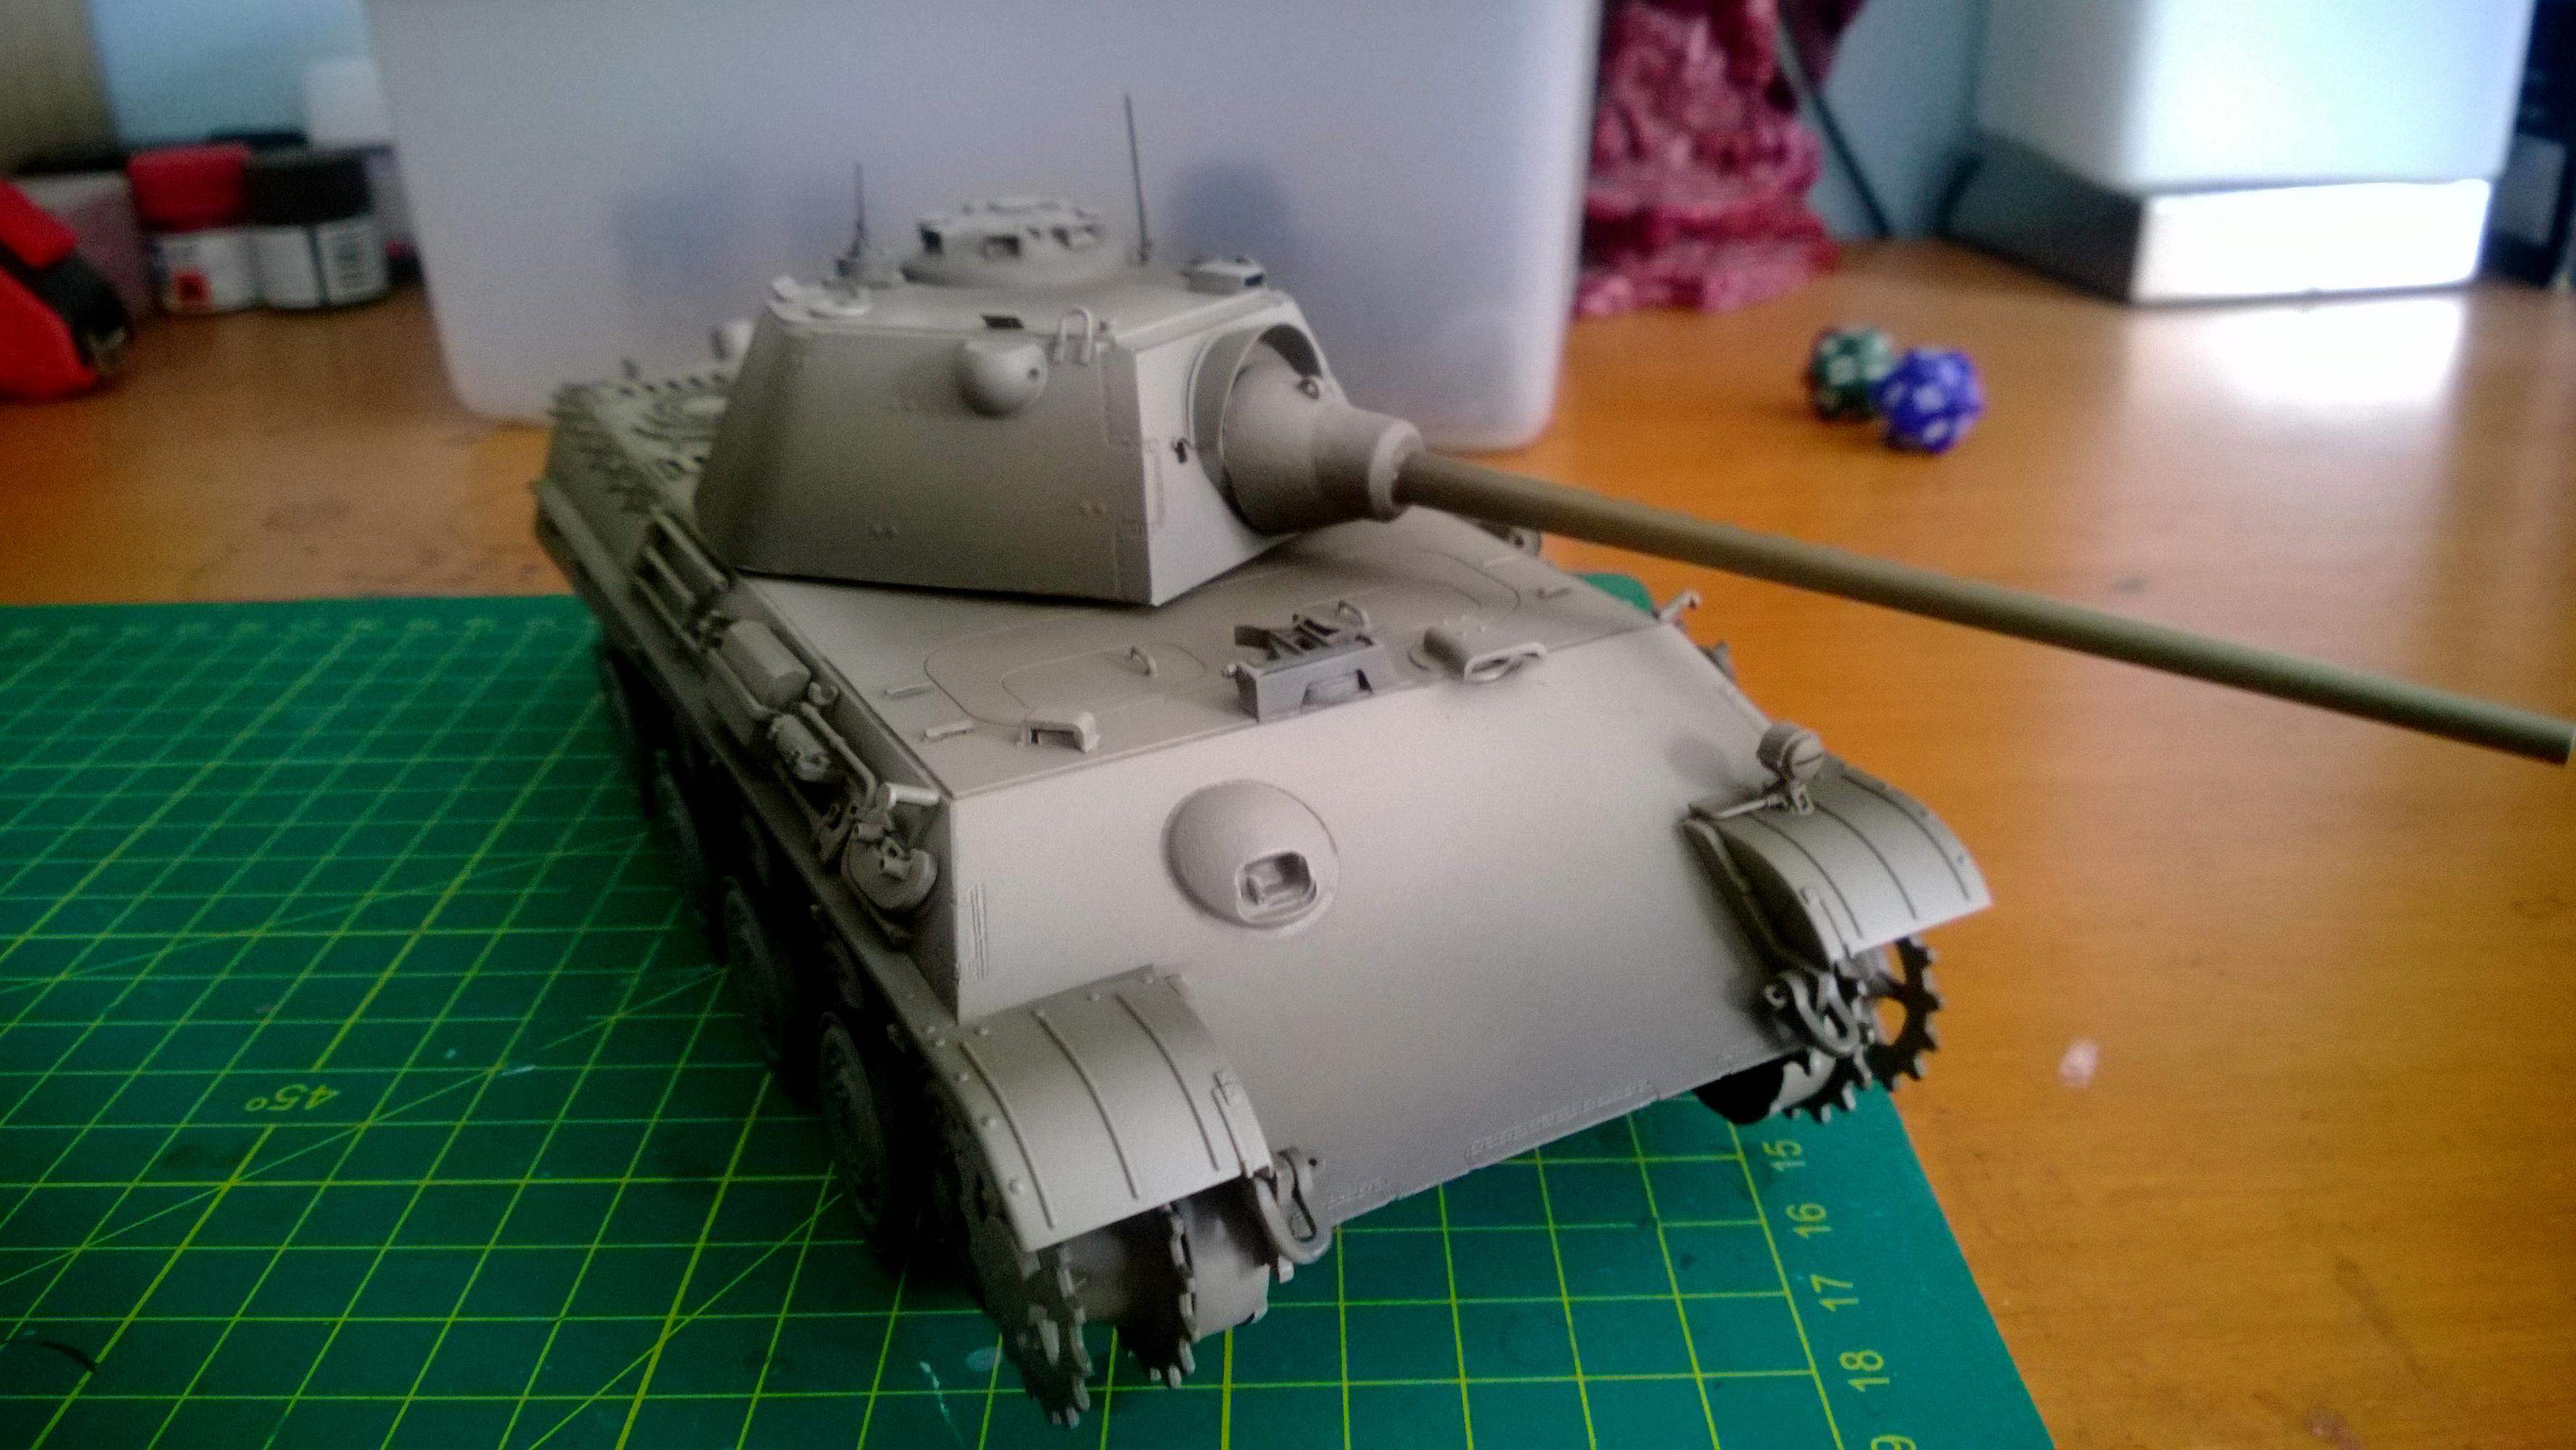 1/35, Germans, Military Modelling, Panther, Scale Modelling, Tiger